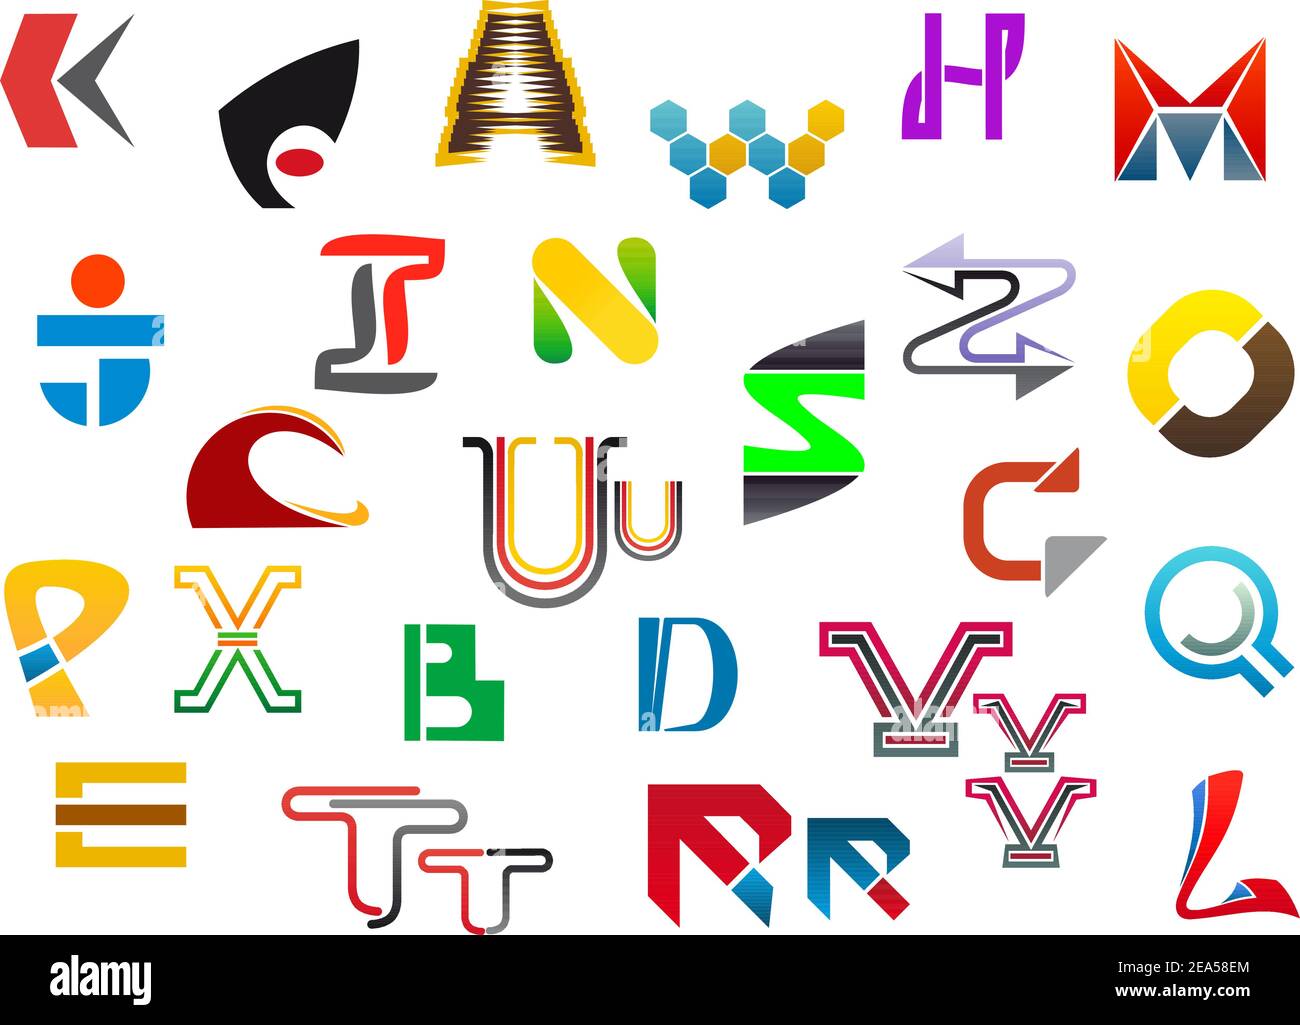 Colorful letter symbols and icons from A to Z Stock Vector